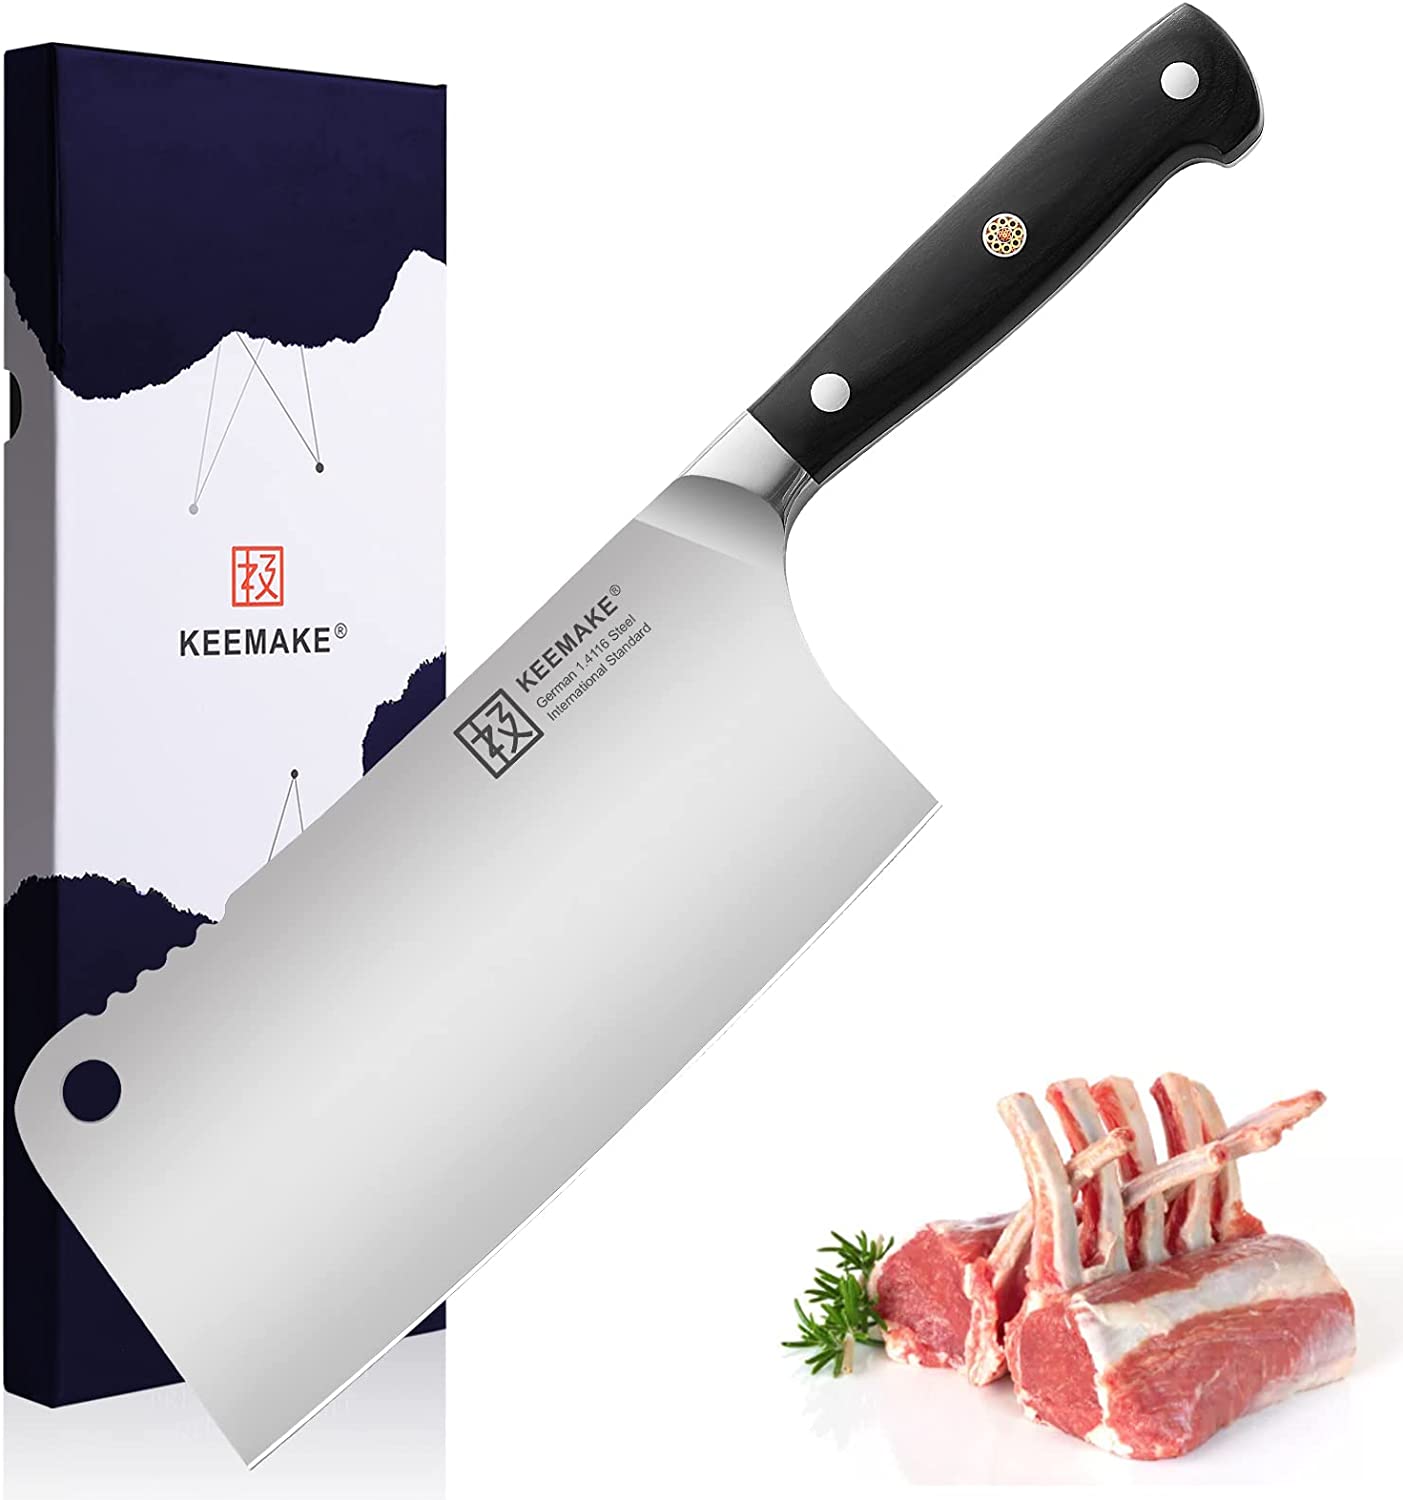 KEEMAKE-Meat Cleaver Knife Heavy Duty with Pakkawood Handle for Bone Cutting Chinese Vegetable Knife